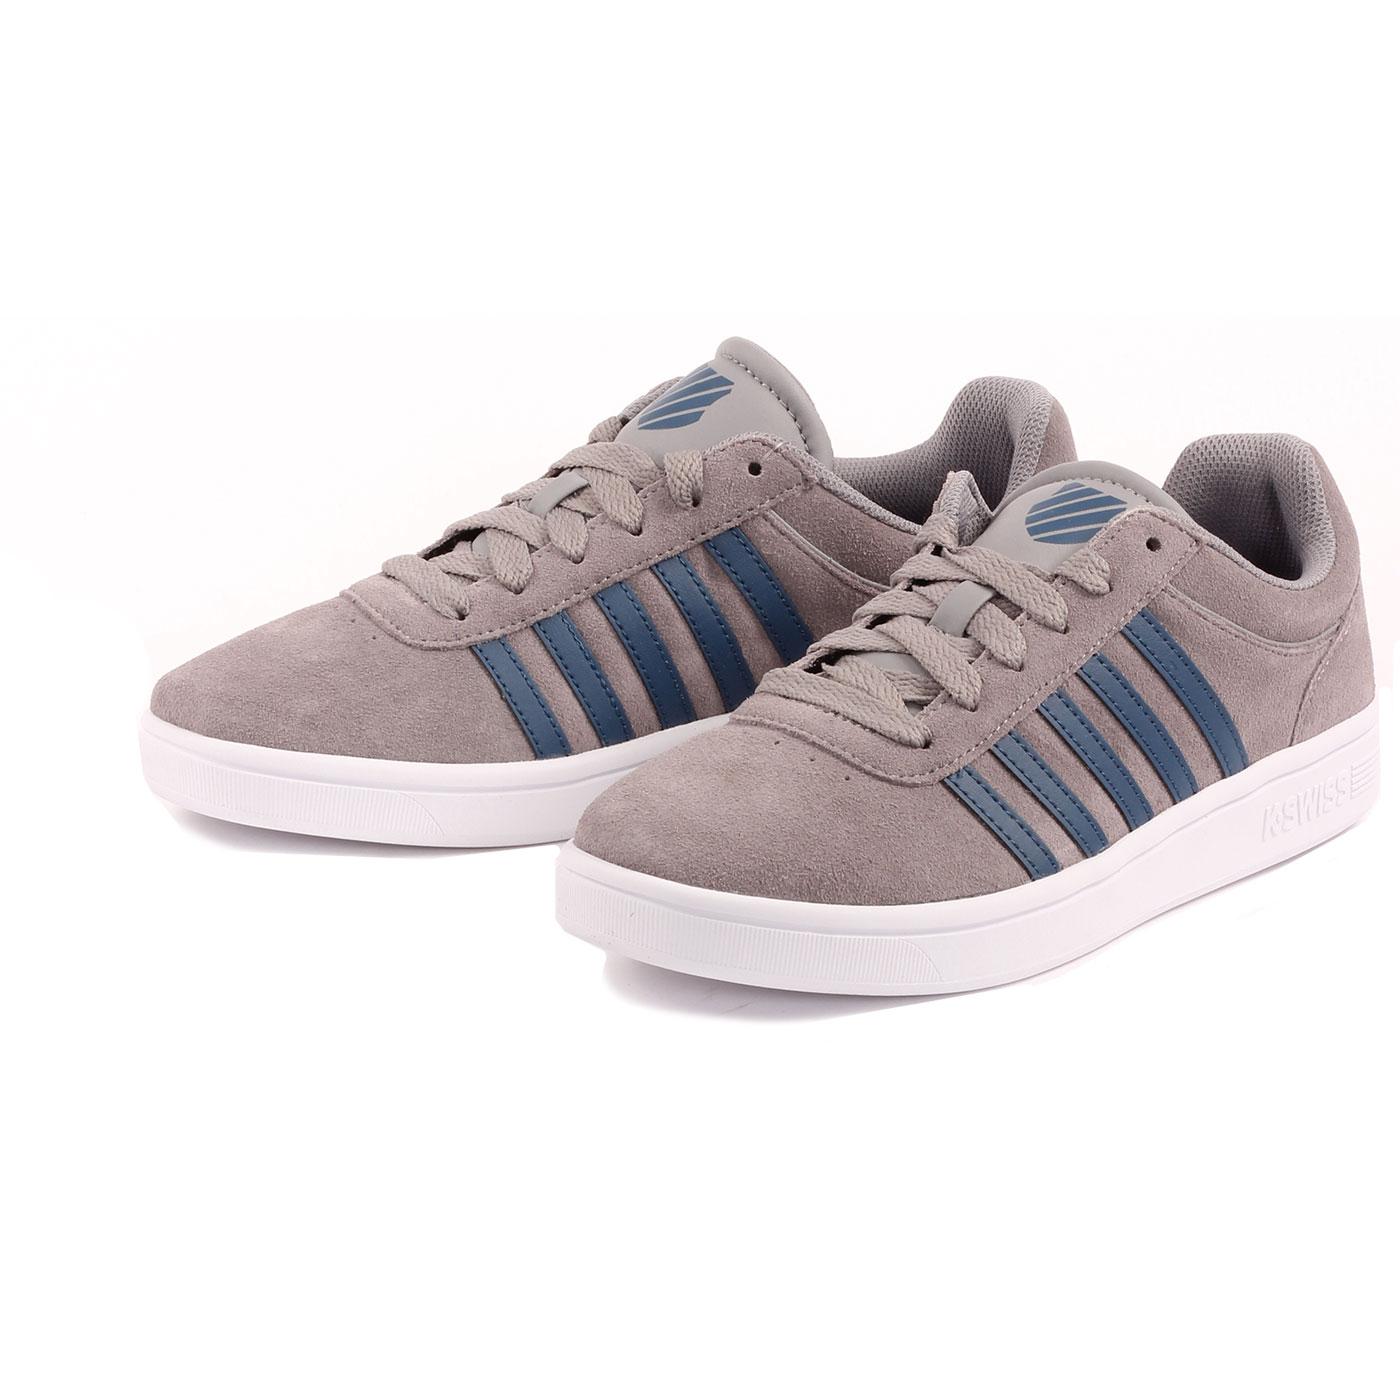 k swiss suede shoes